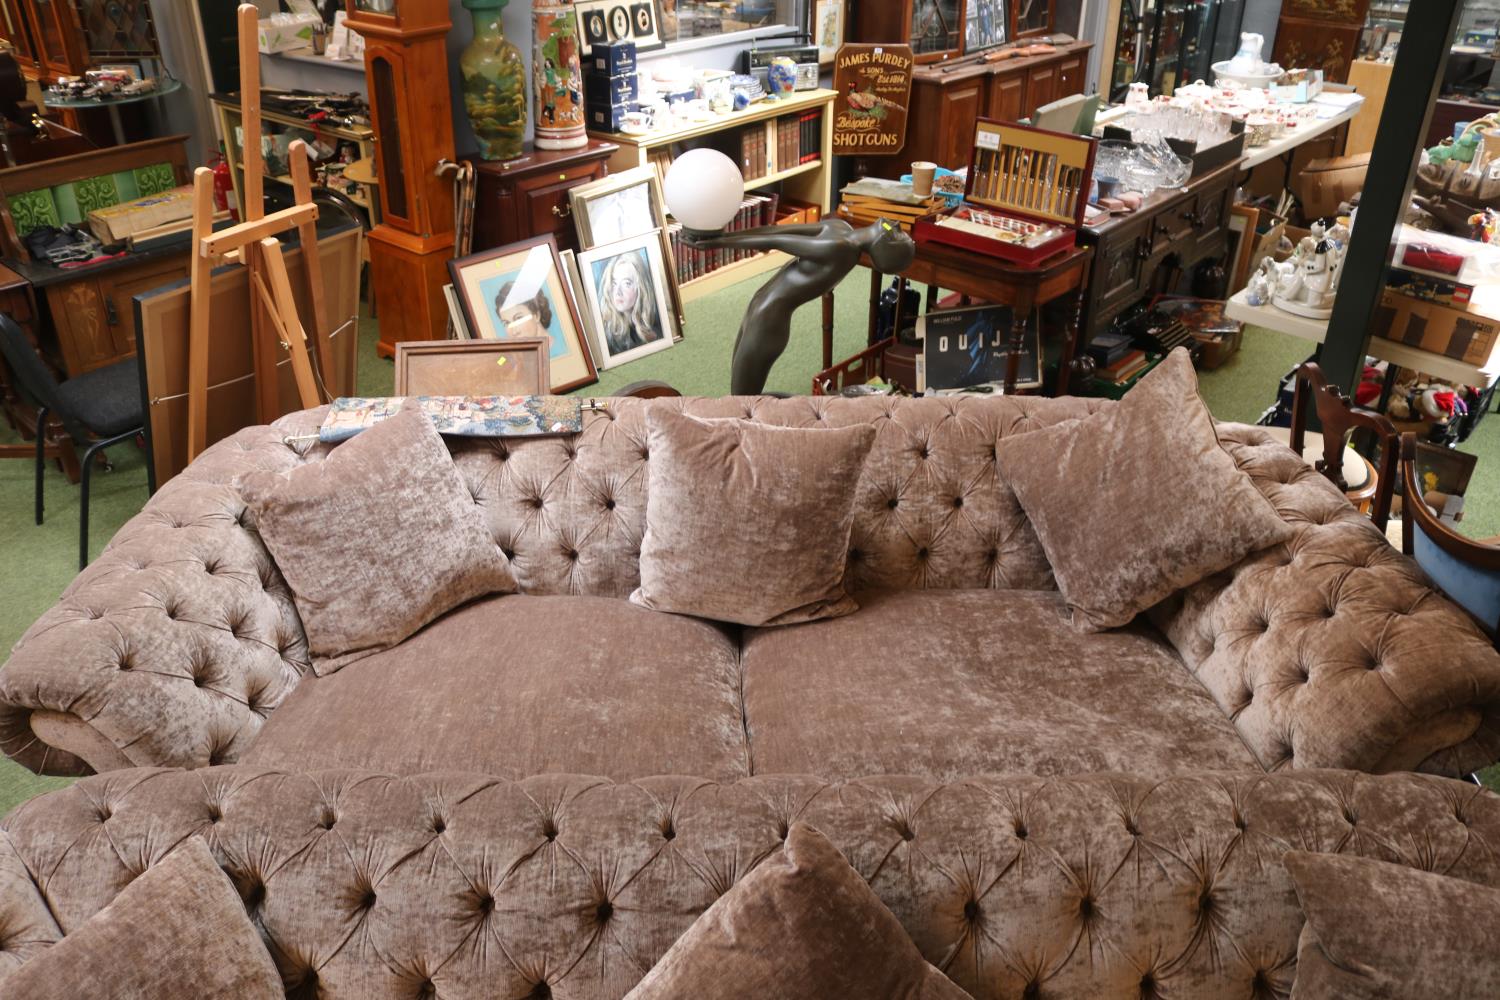 Very Large Velour Chesterfield button back sofa 275cm in Length